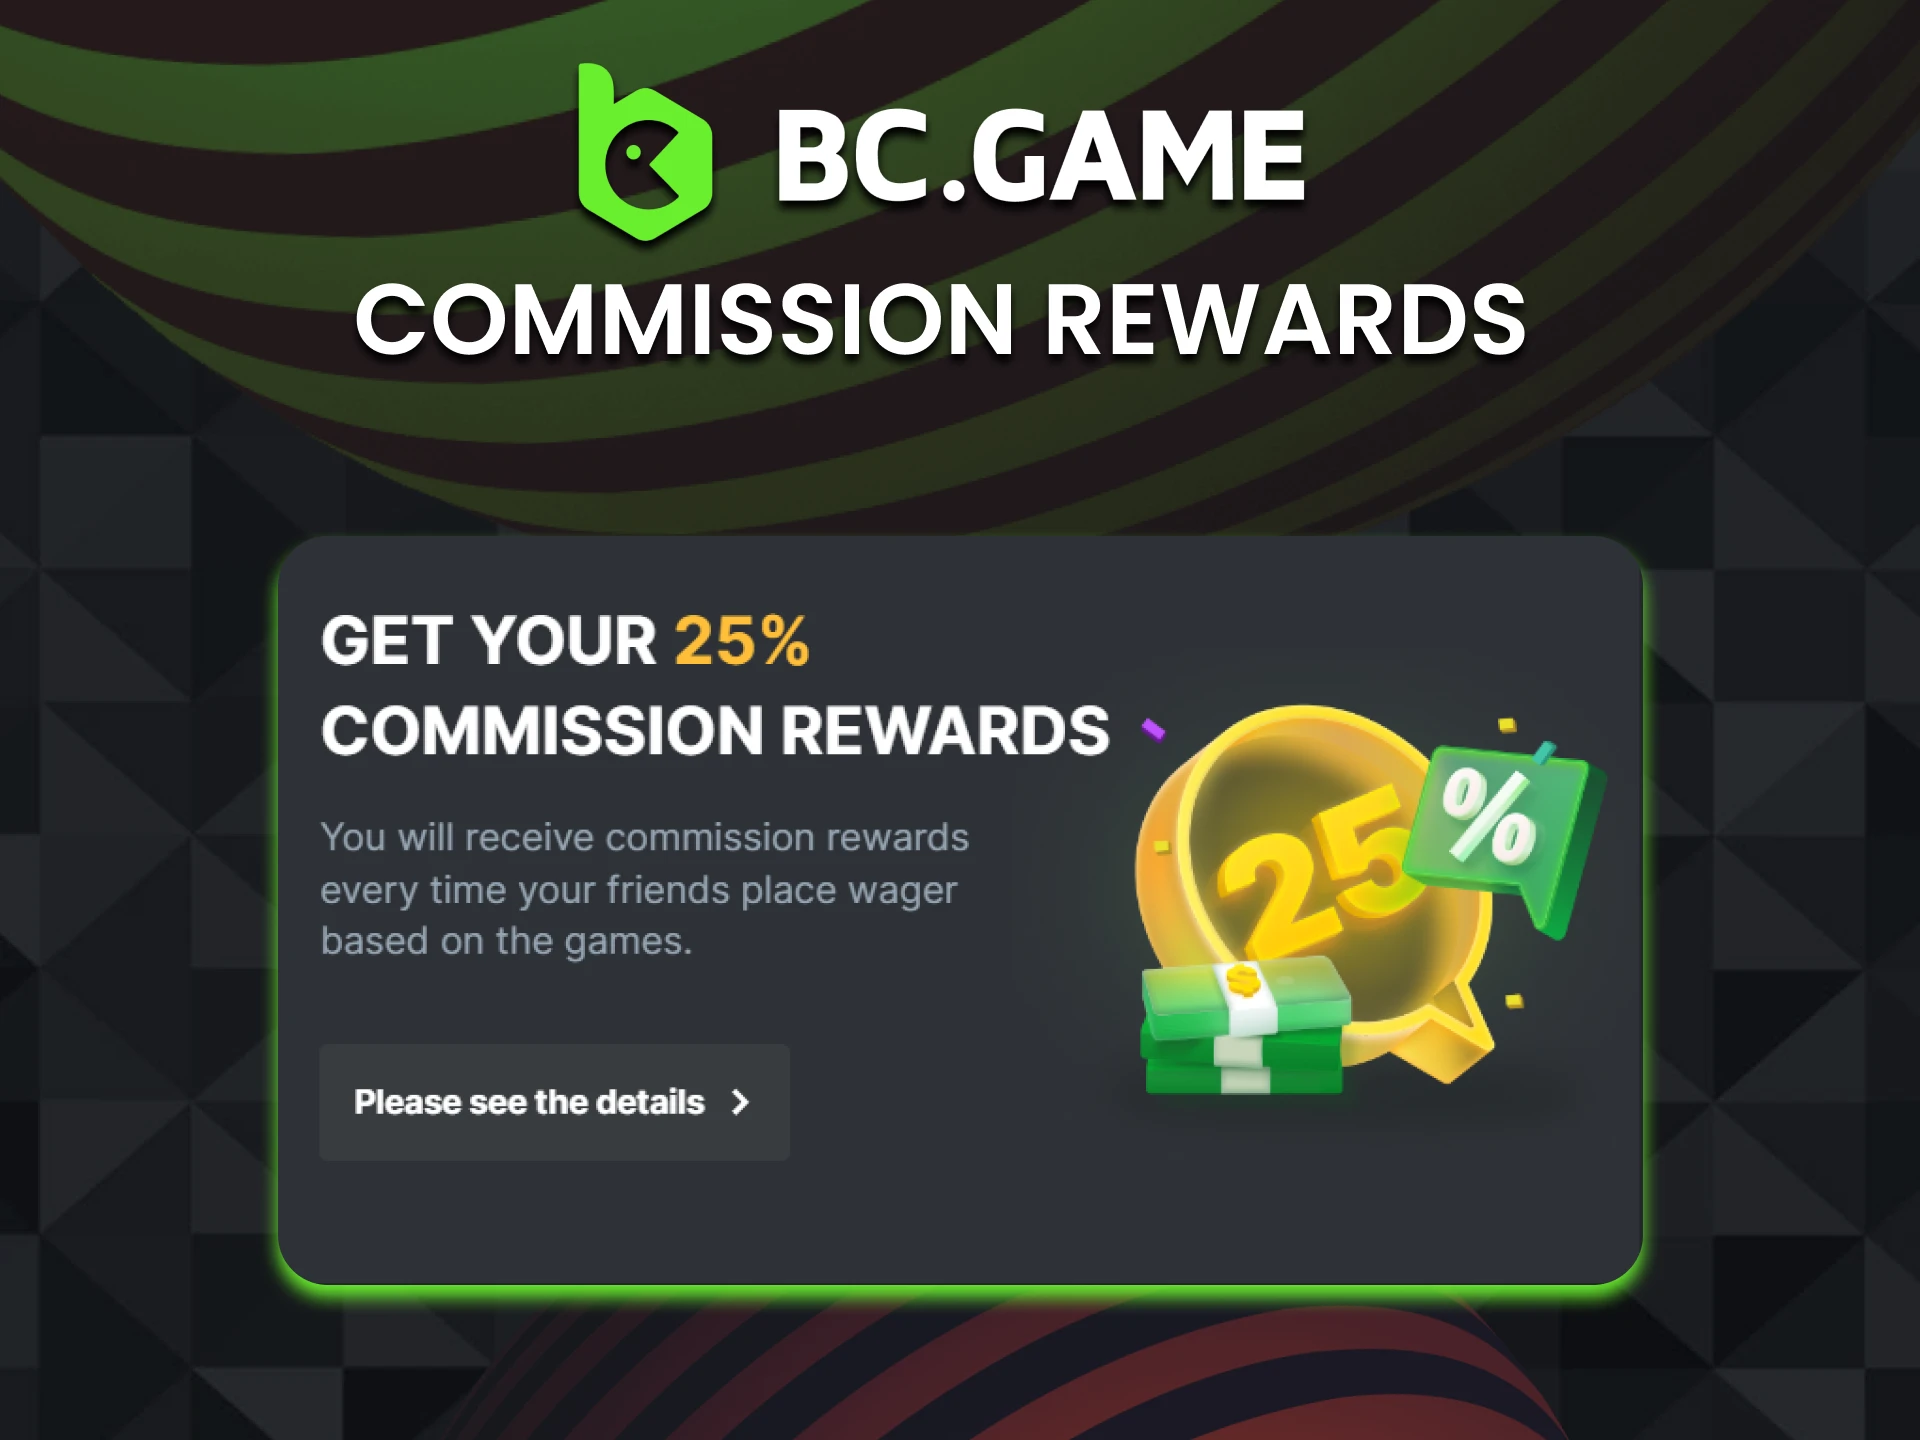 We will tell you about the reward from the BCGame affiliate program.